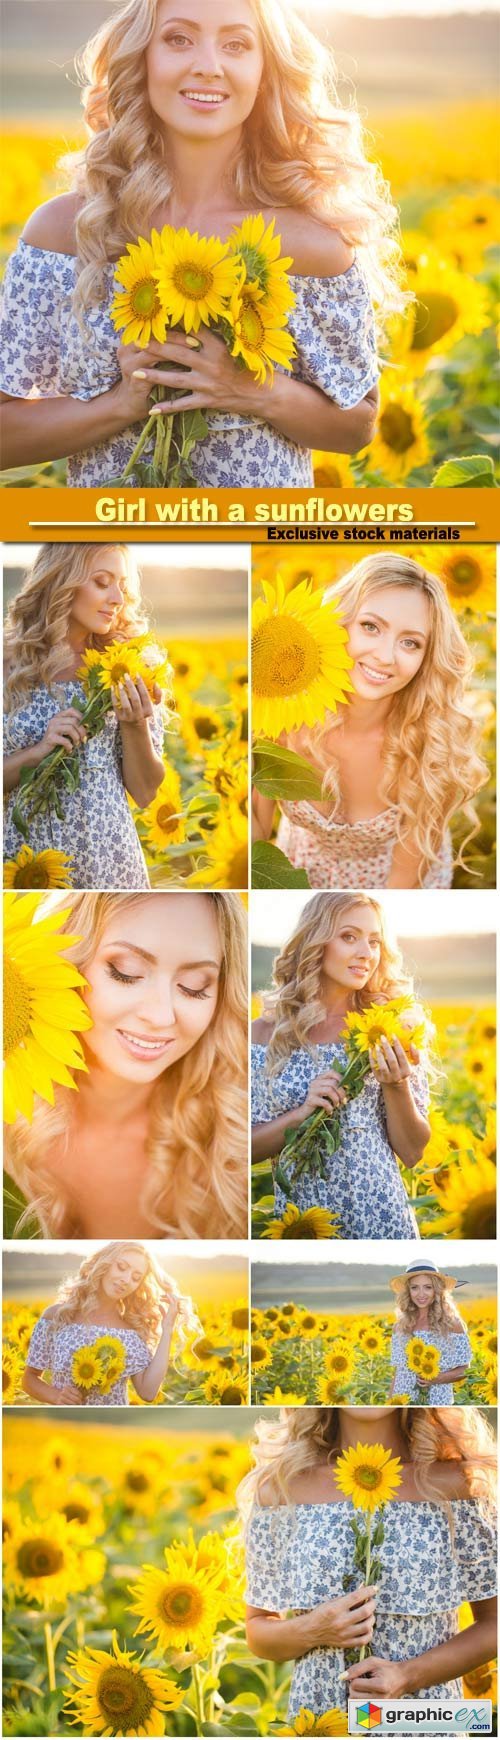 Portrait of the beautiful girl with a sunflowers